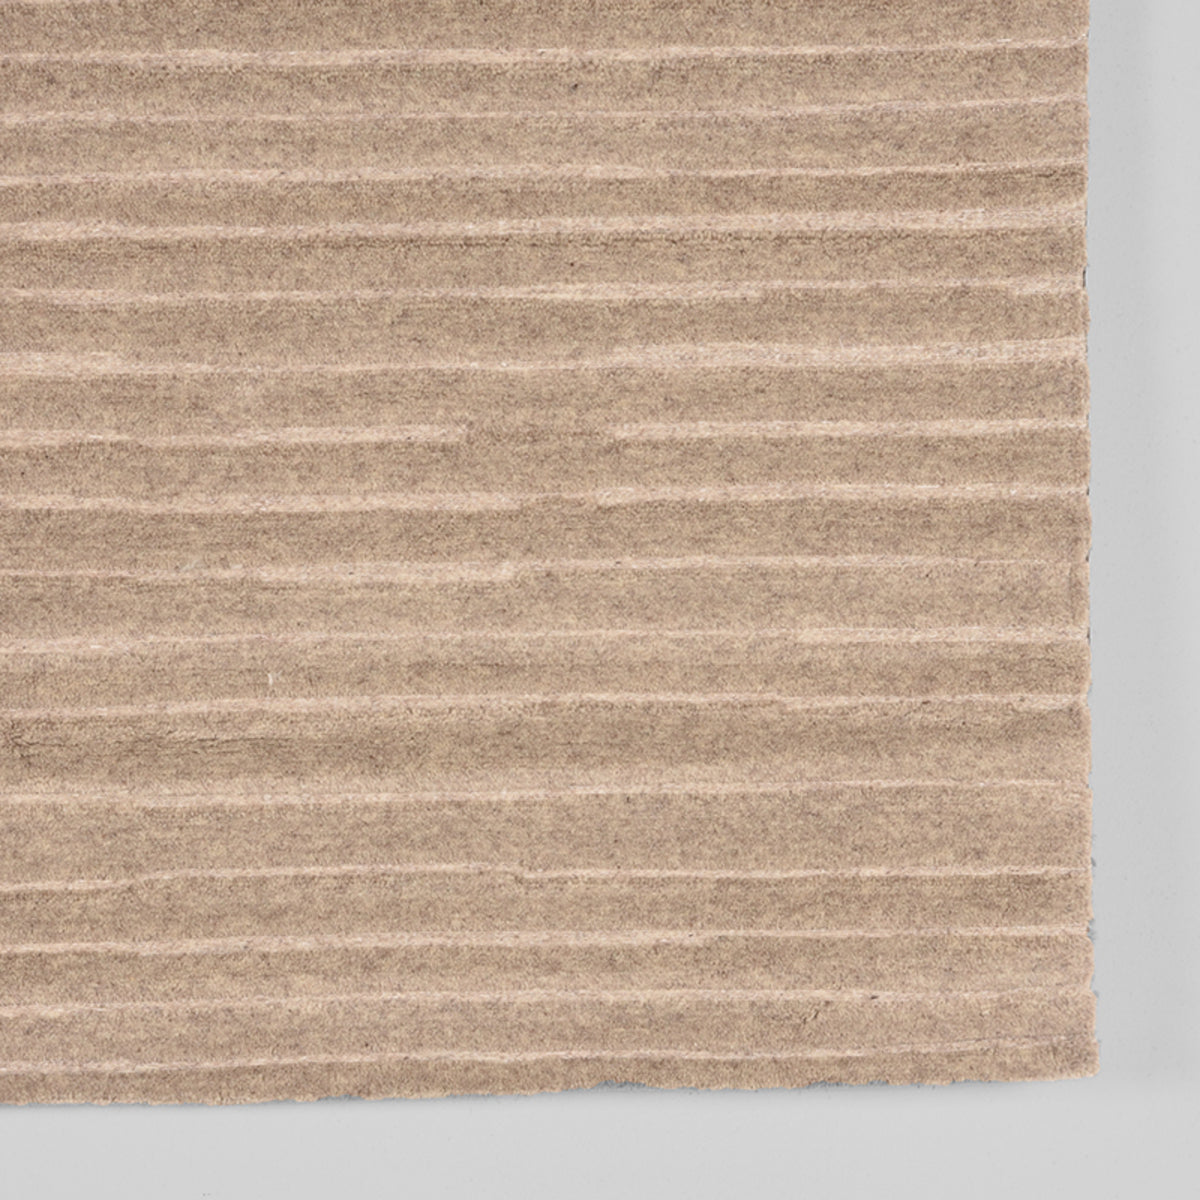 LABEL51 Rugs Luxy - Taupe - Wool - 160x230 cm